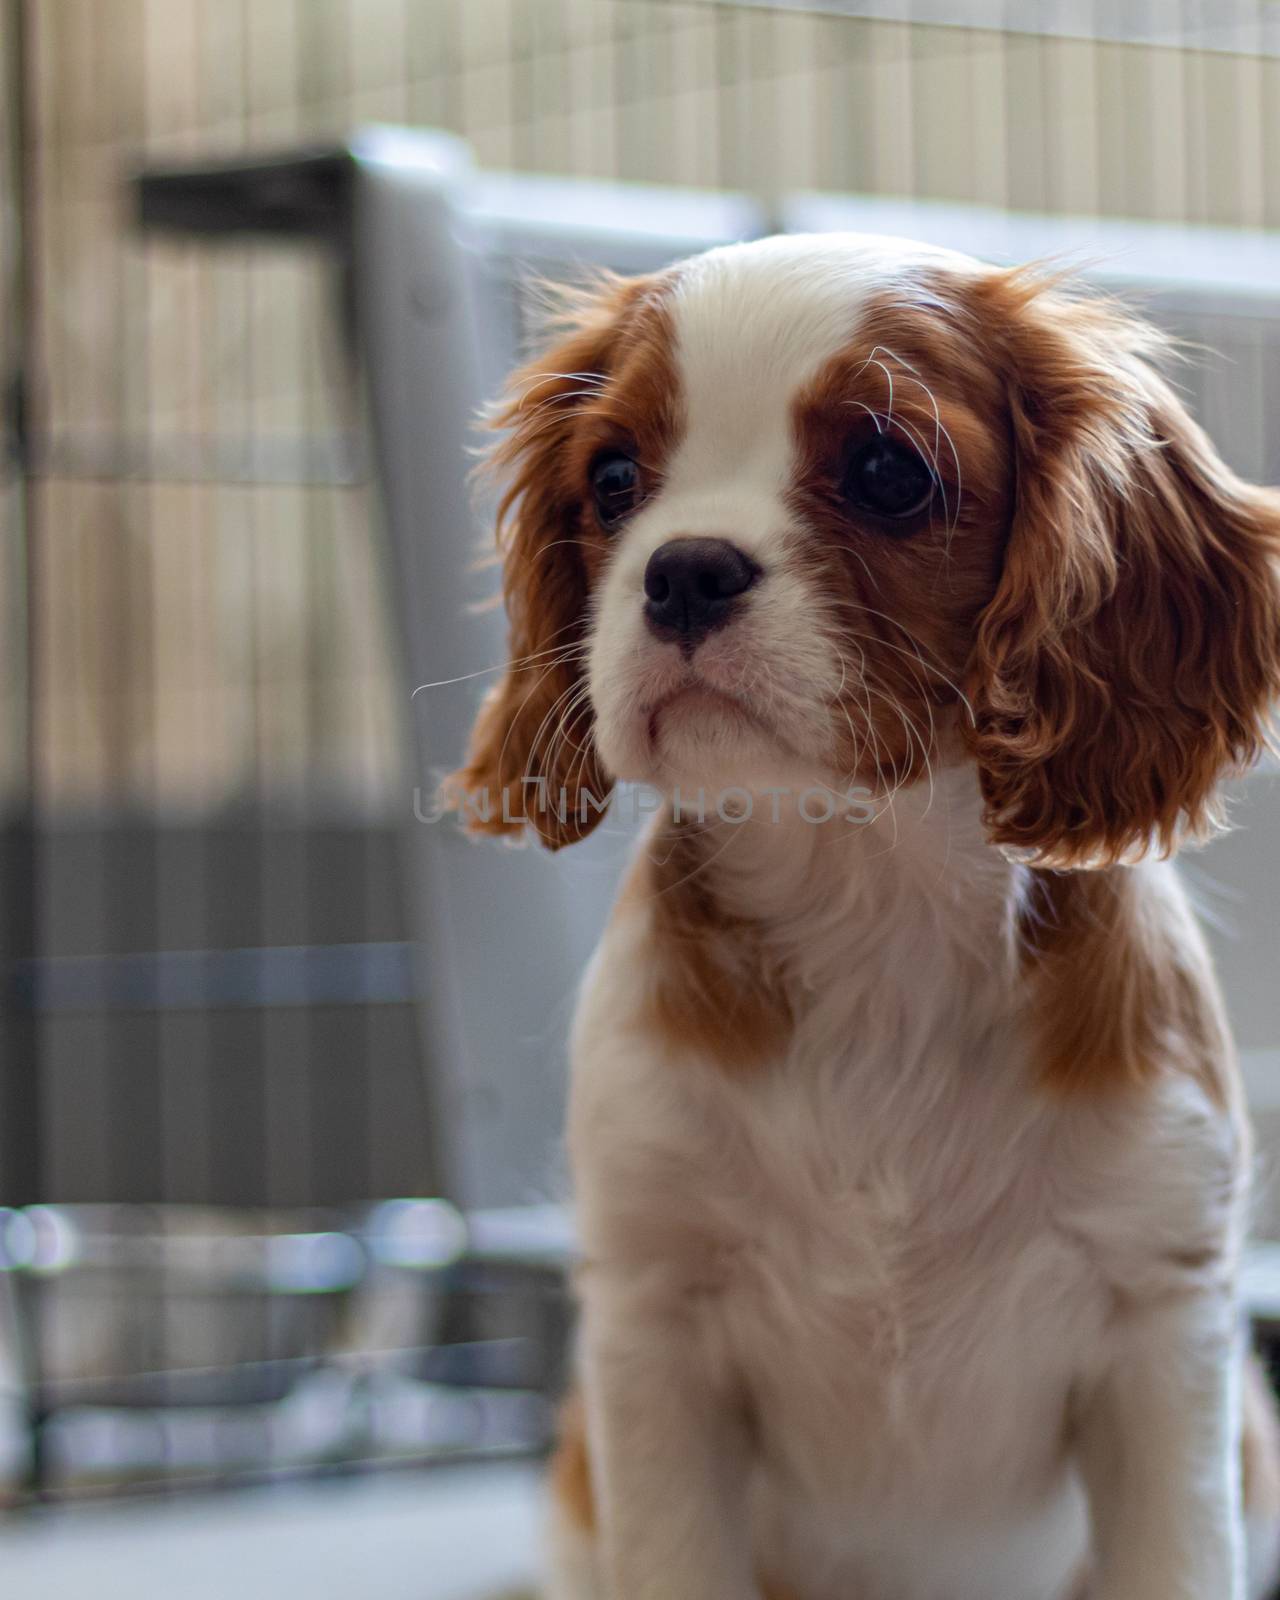 A puppy of the Cavalier King Charles Spaniel breed sits and looks to the side before a metal crate. The cute pup has the Blenheim colouring of this toy breed of dog.